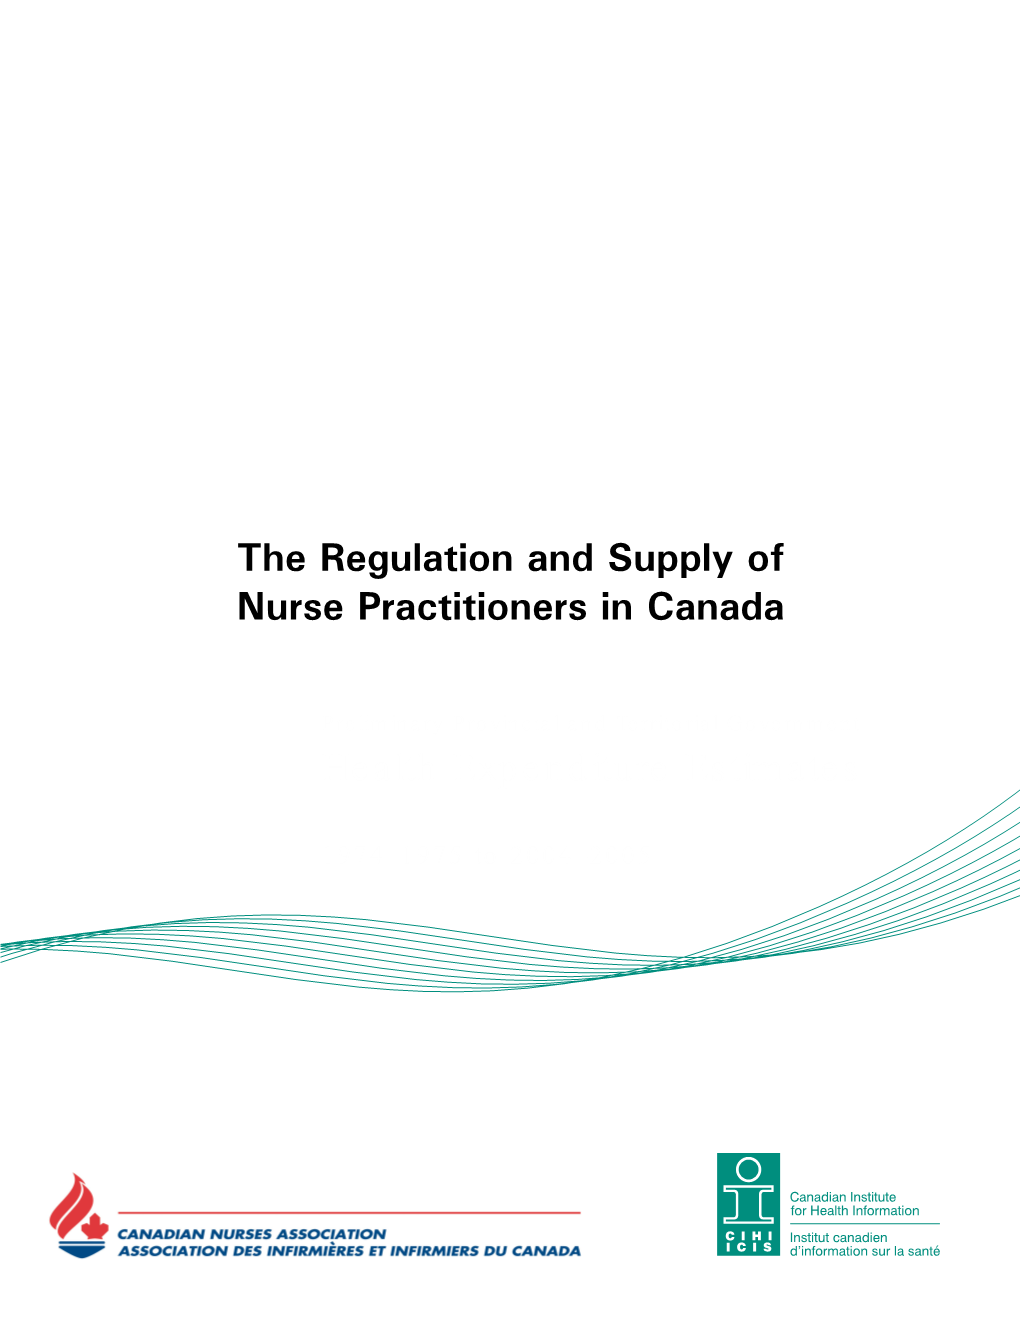 The Regulation and Supply of Nurse Practitioners in Canada